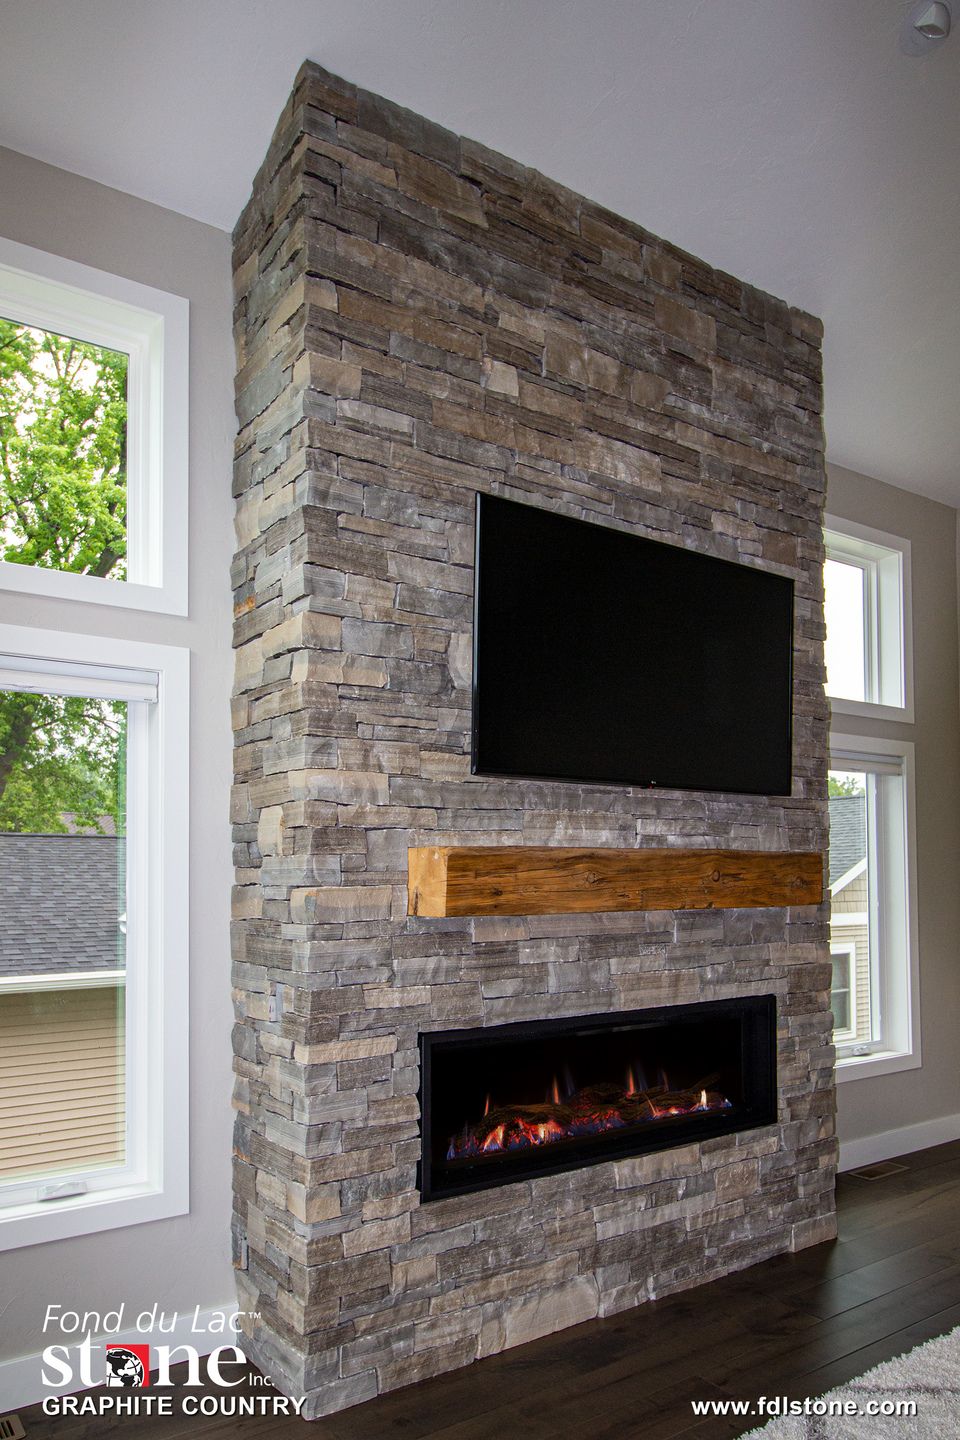 Graphite Country - Residential Fireplace 2 - Fond du Lac Natural Stone